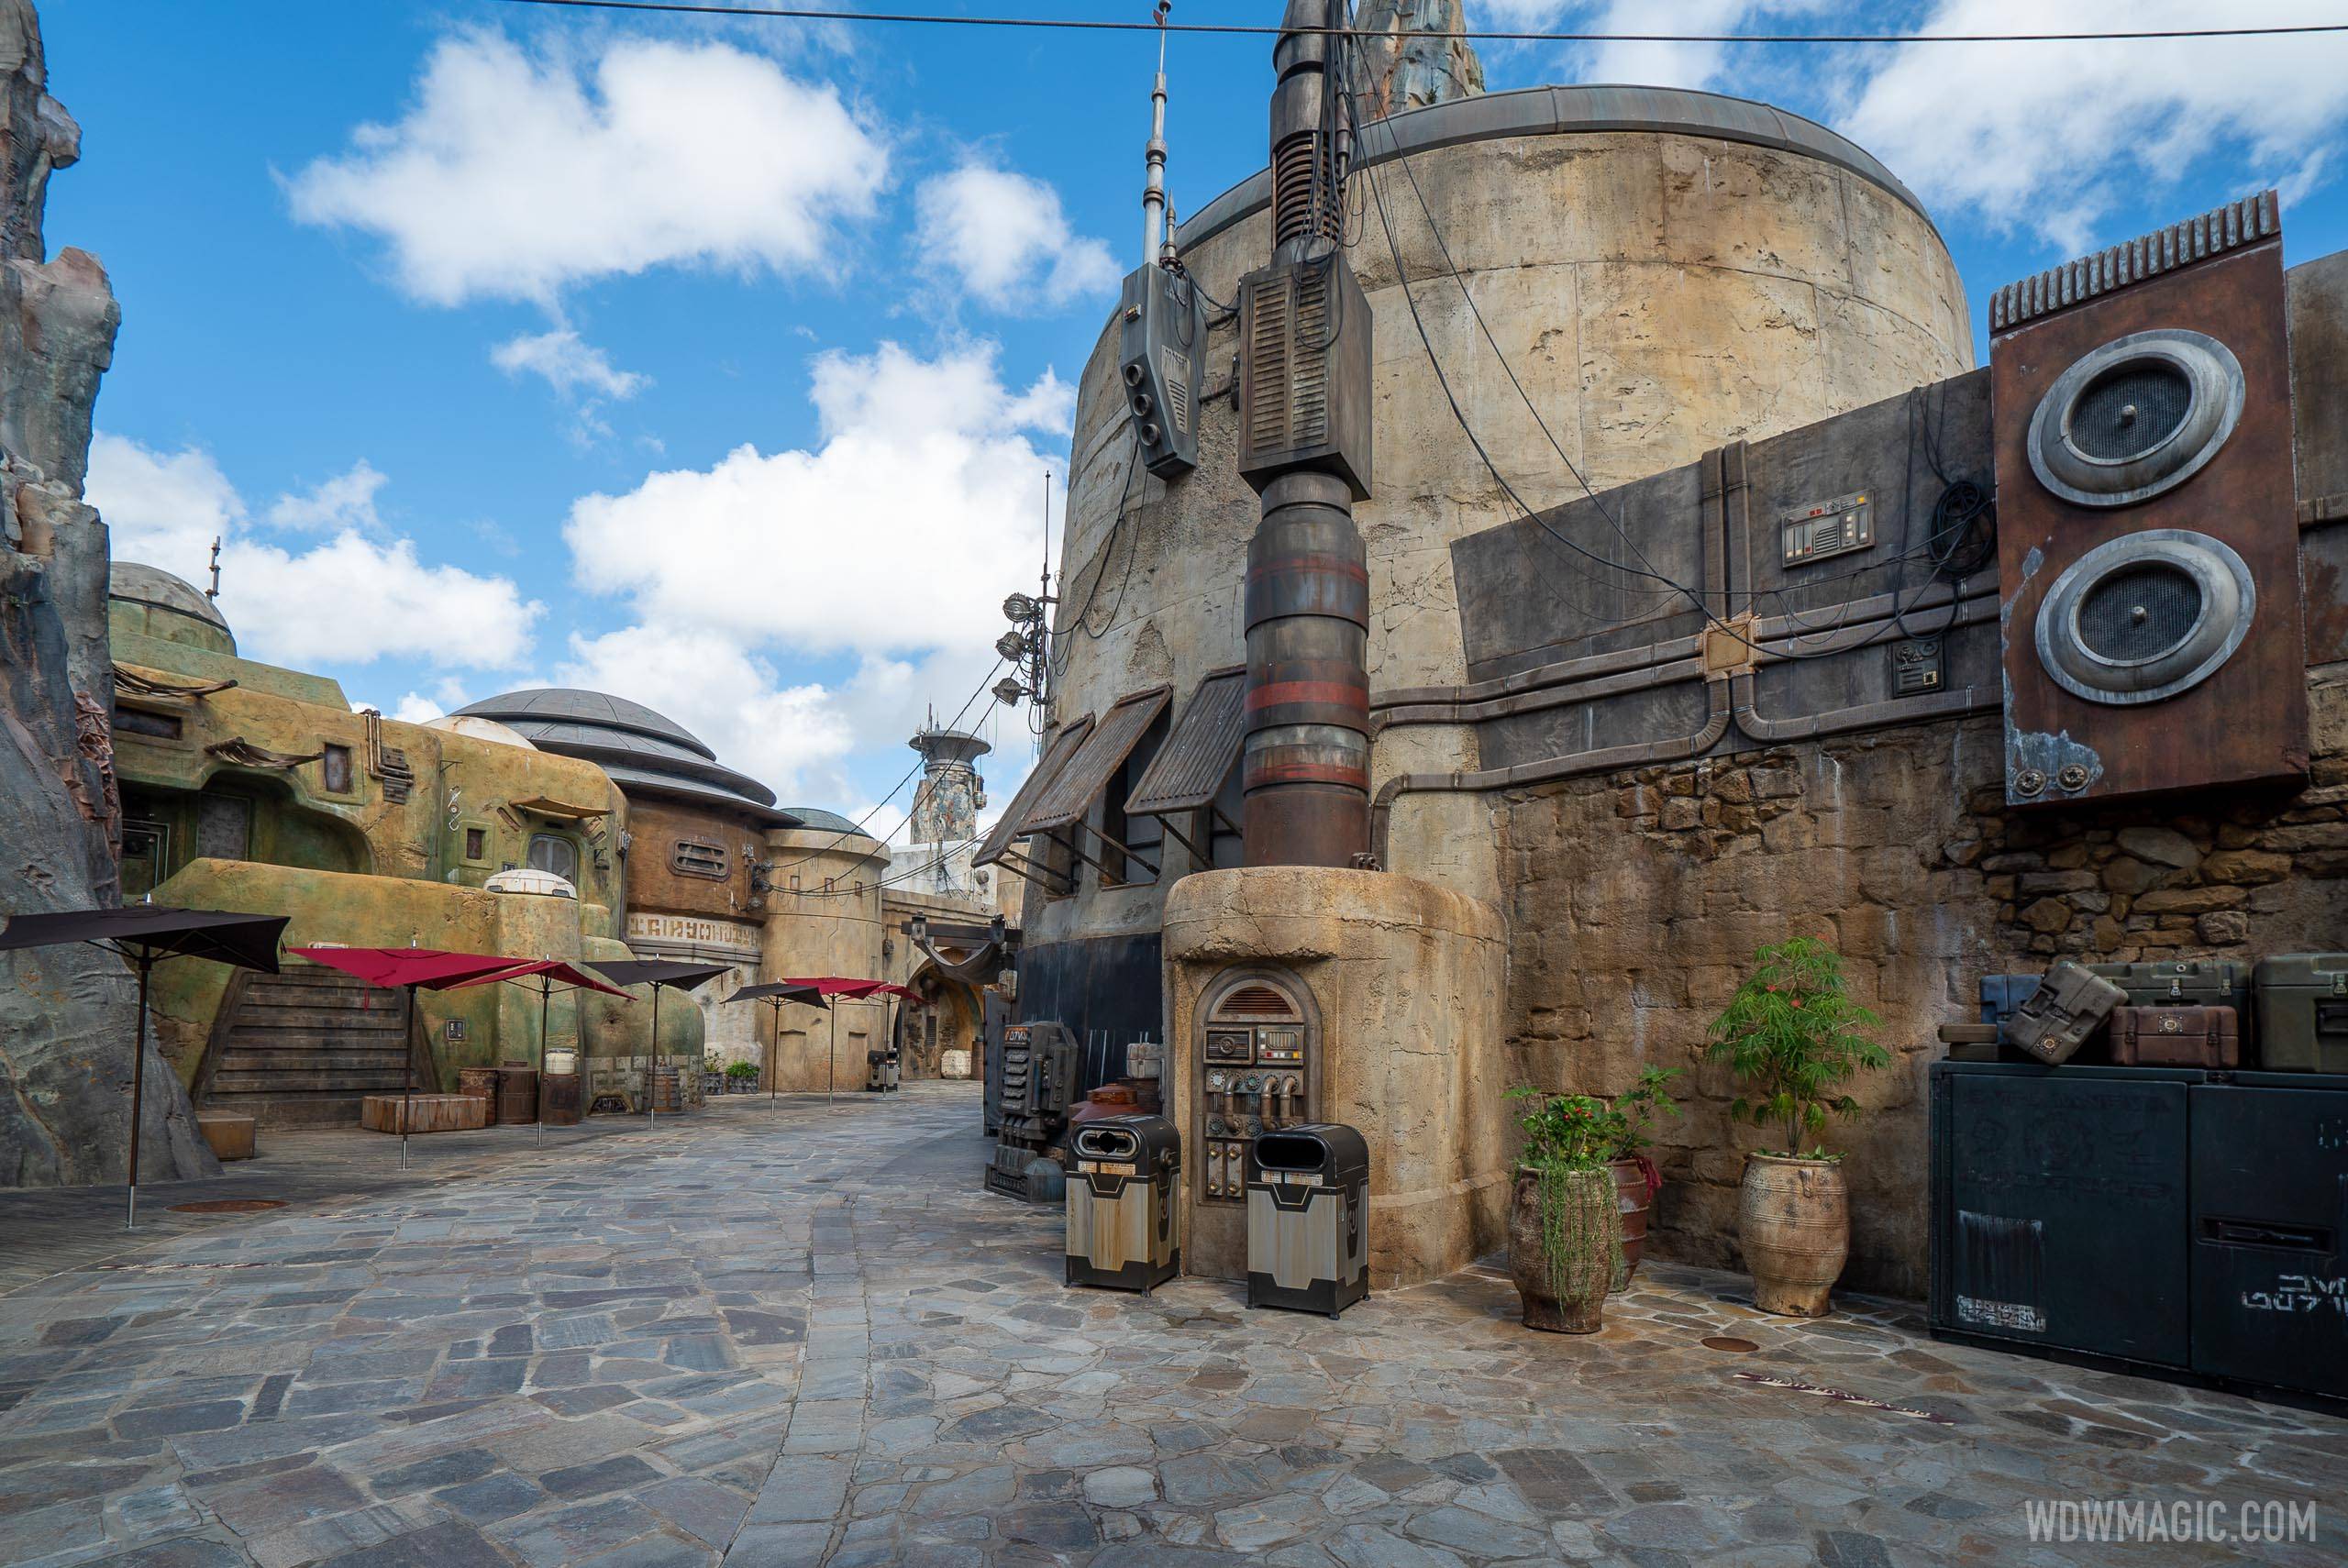 Star Wars Galaxy's Edge was expected to be a huge draw for visitors to Florida this summer